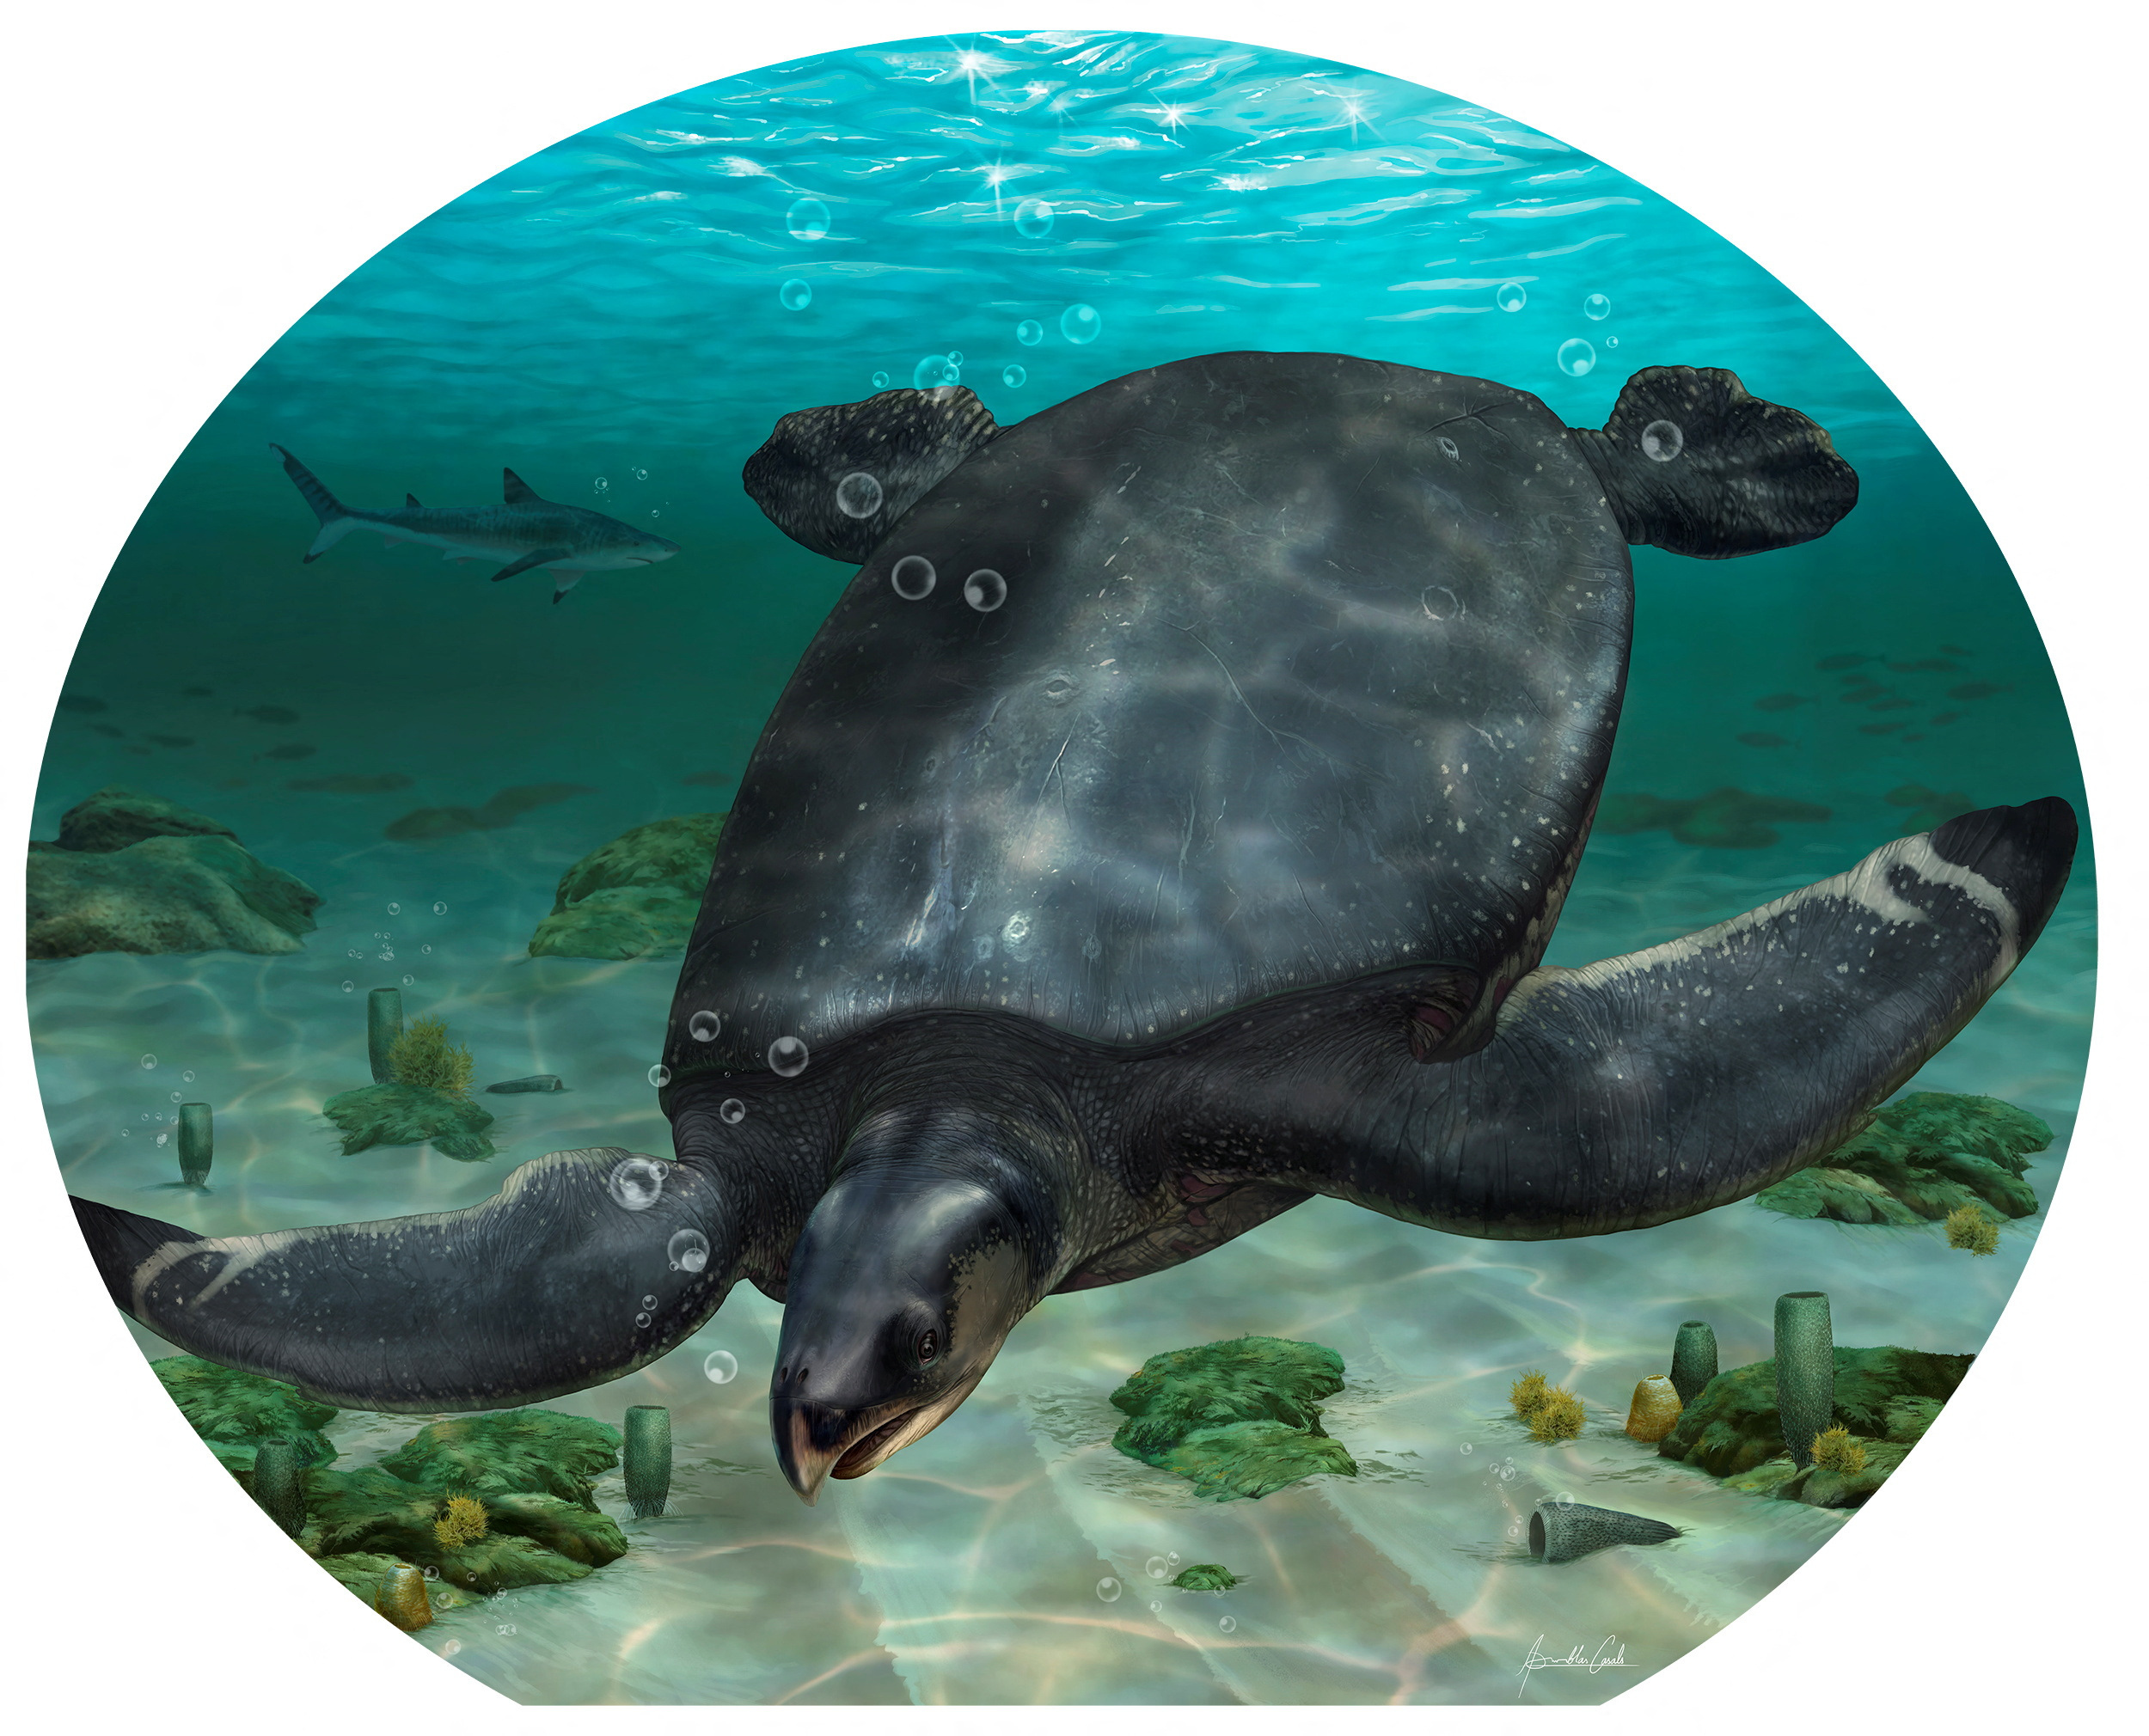 Car-sized sea turtle fossils from the dinosaur era unearthed in Spain